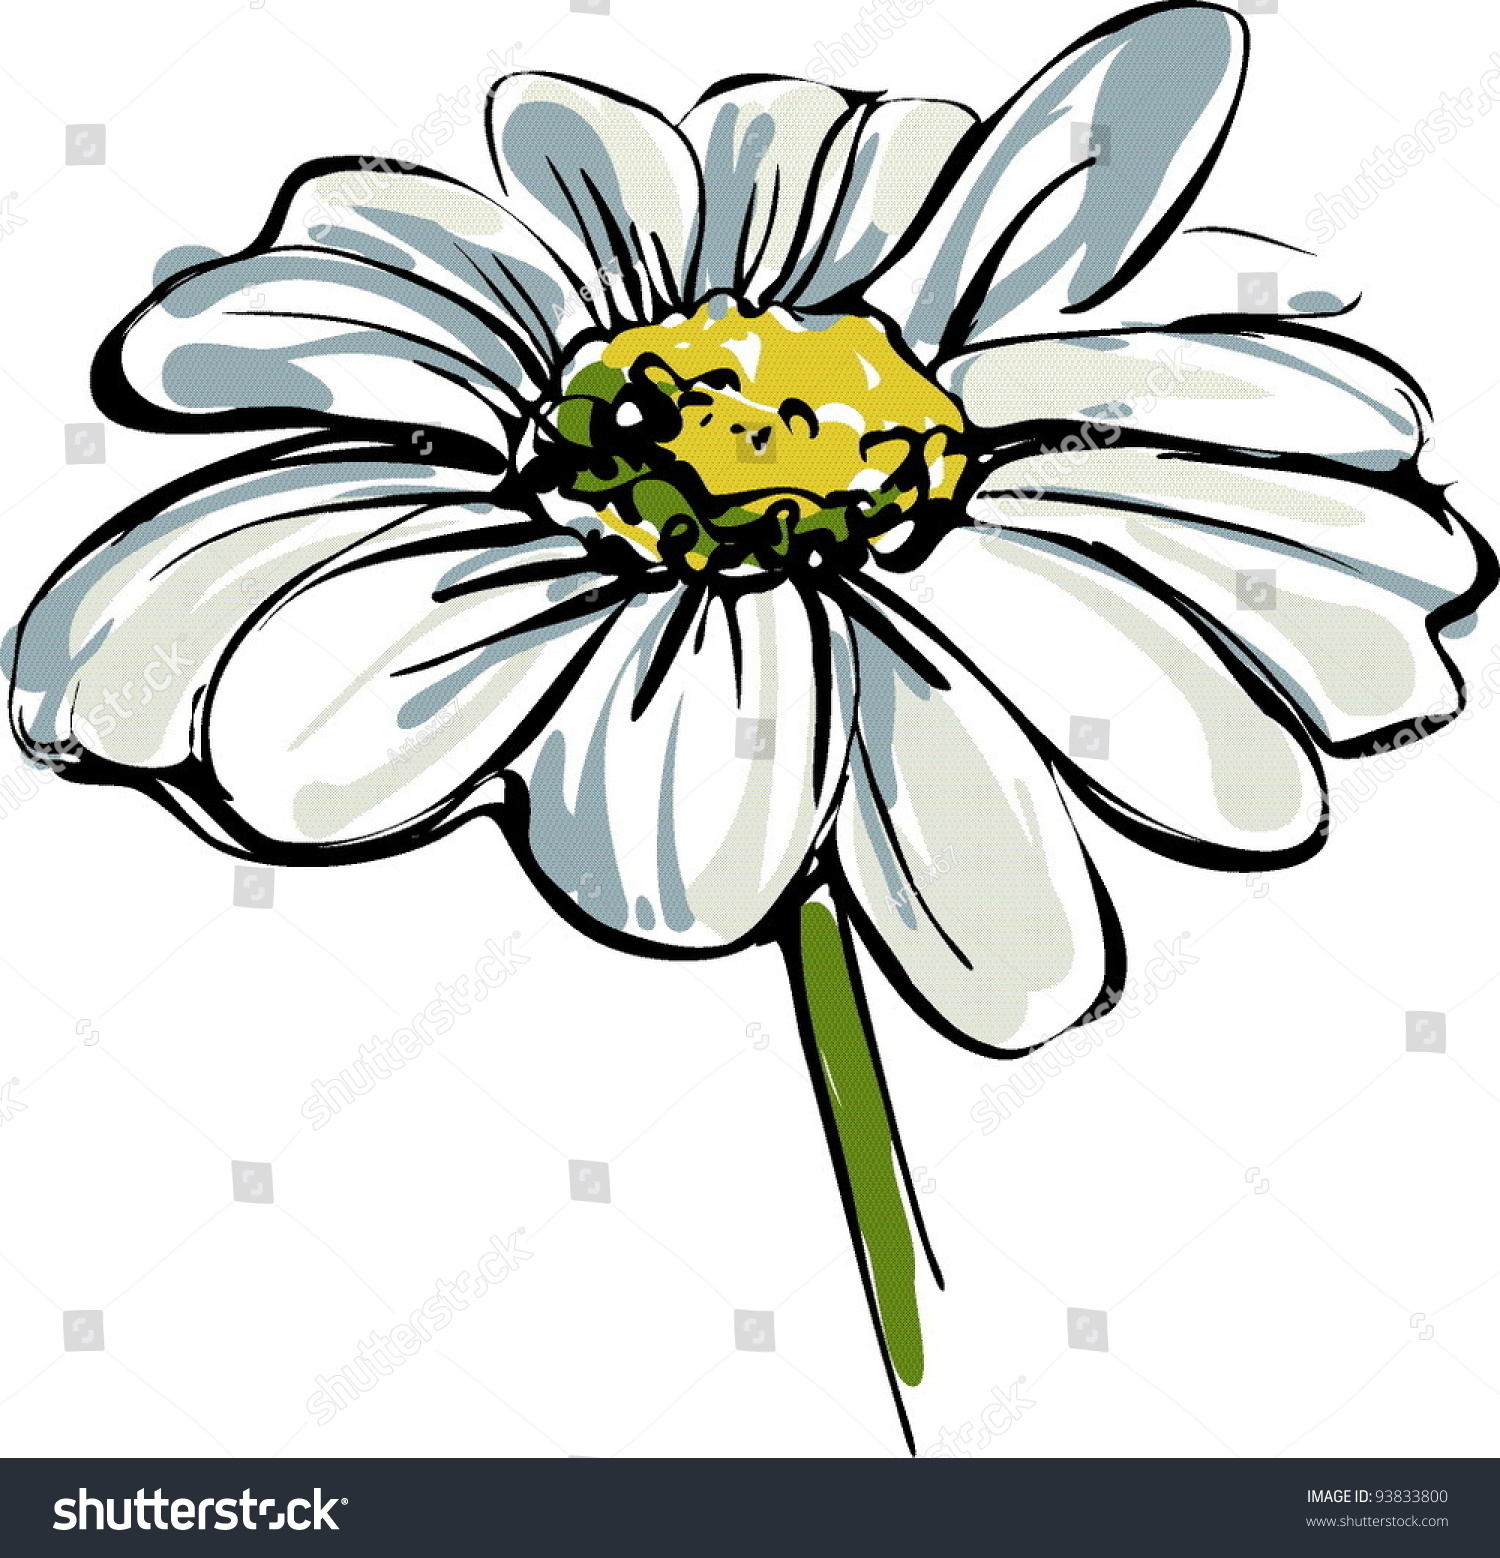 Sketch Wild Flower Resembling Daisy Stock Vector HD (Royalty Free ...